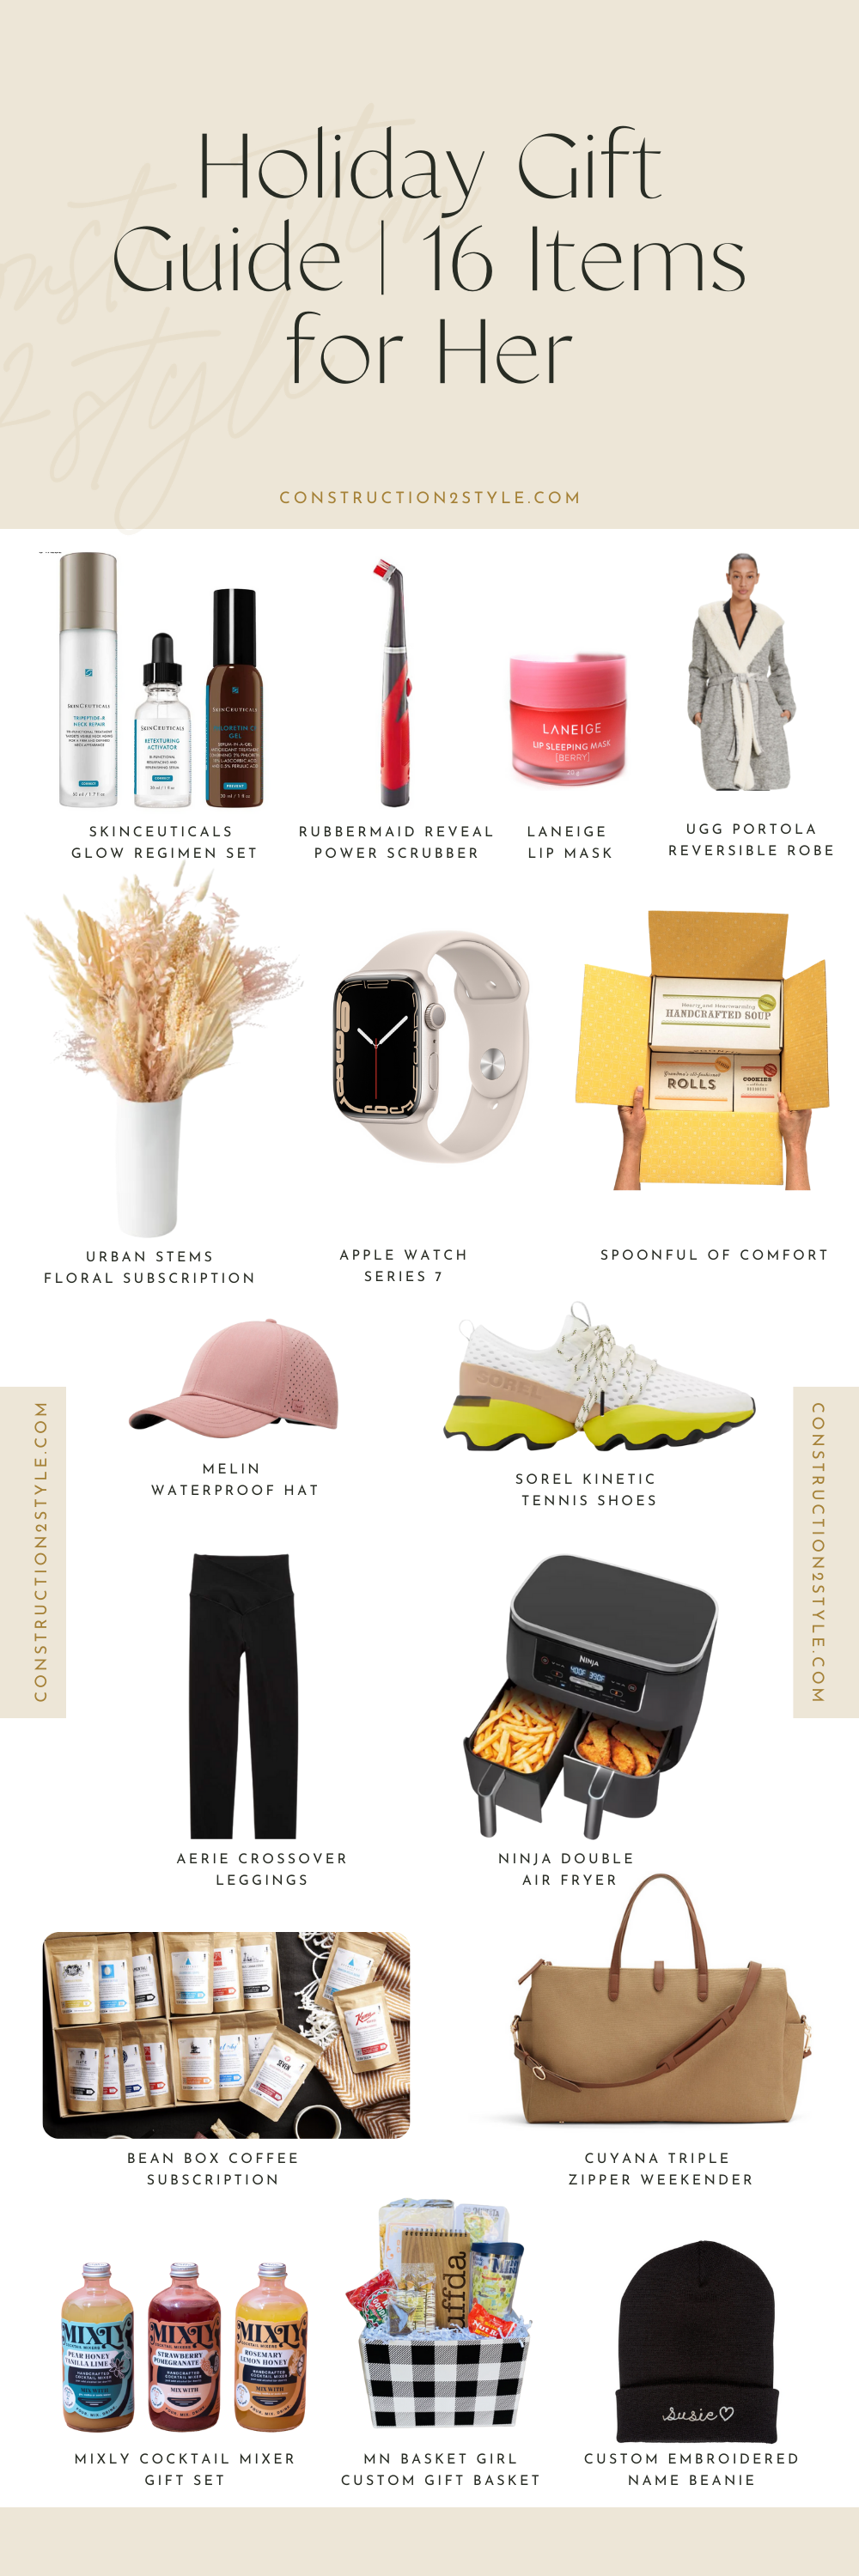 Holiday Gift Guide | 16 Items for Her